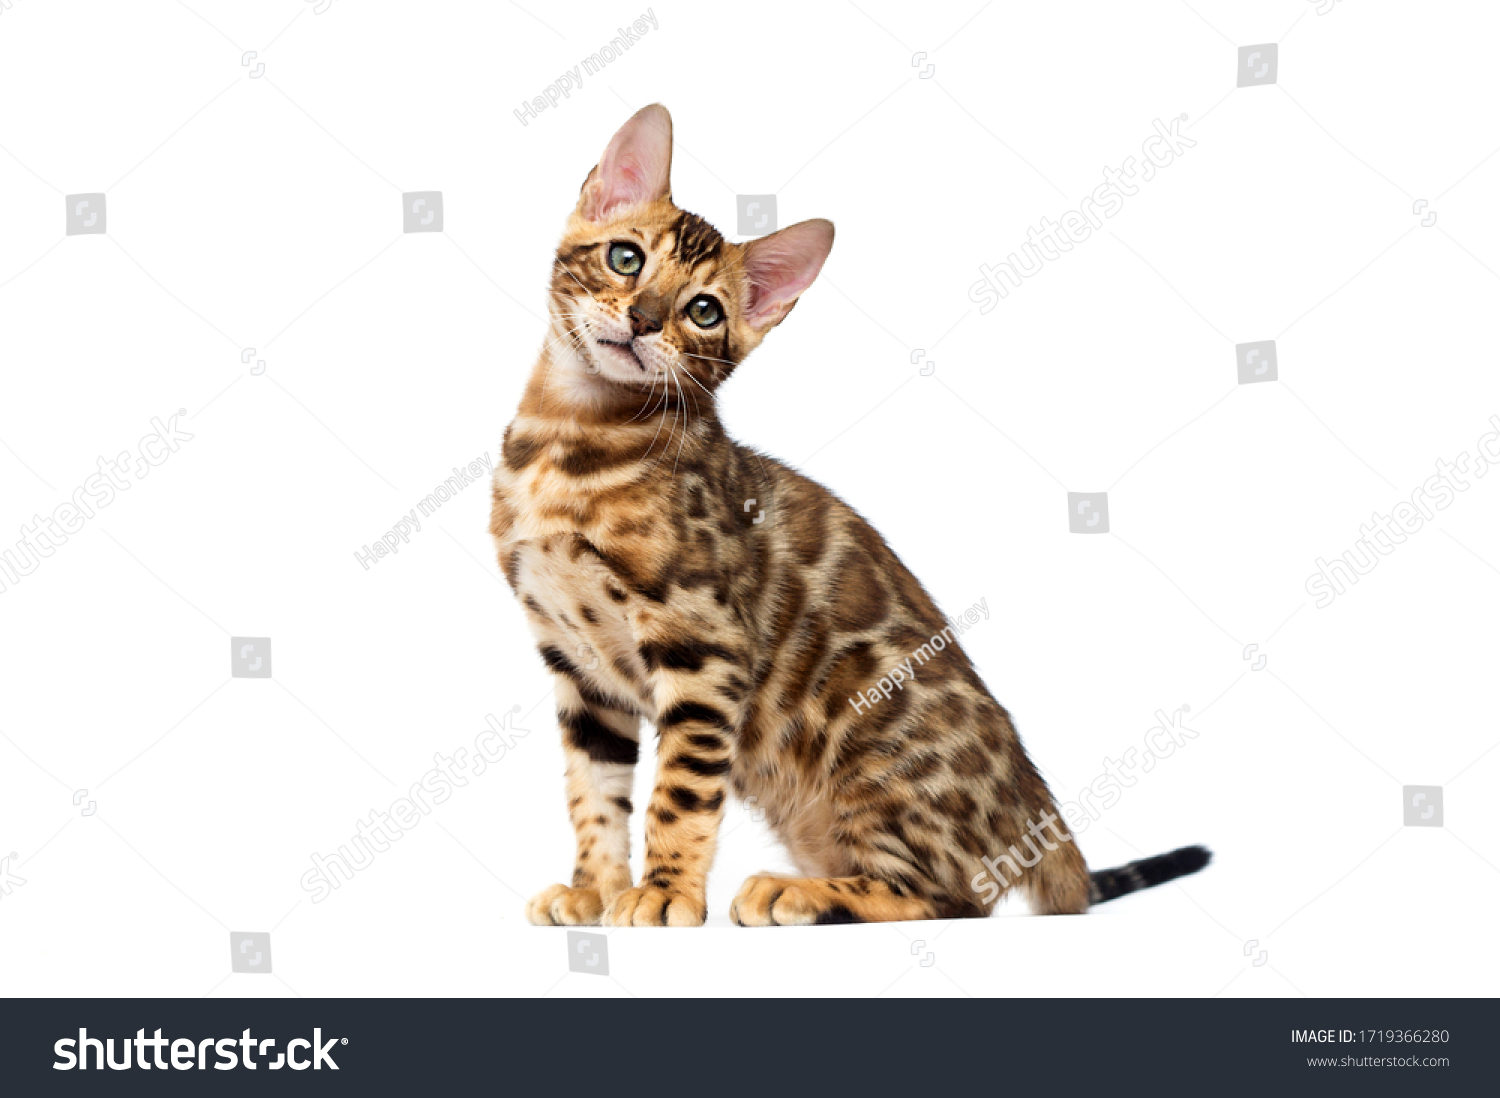 bengal cat sitting on a white background #1719366280